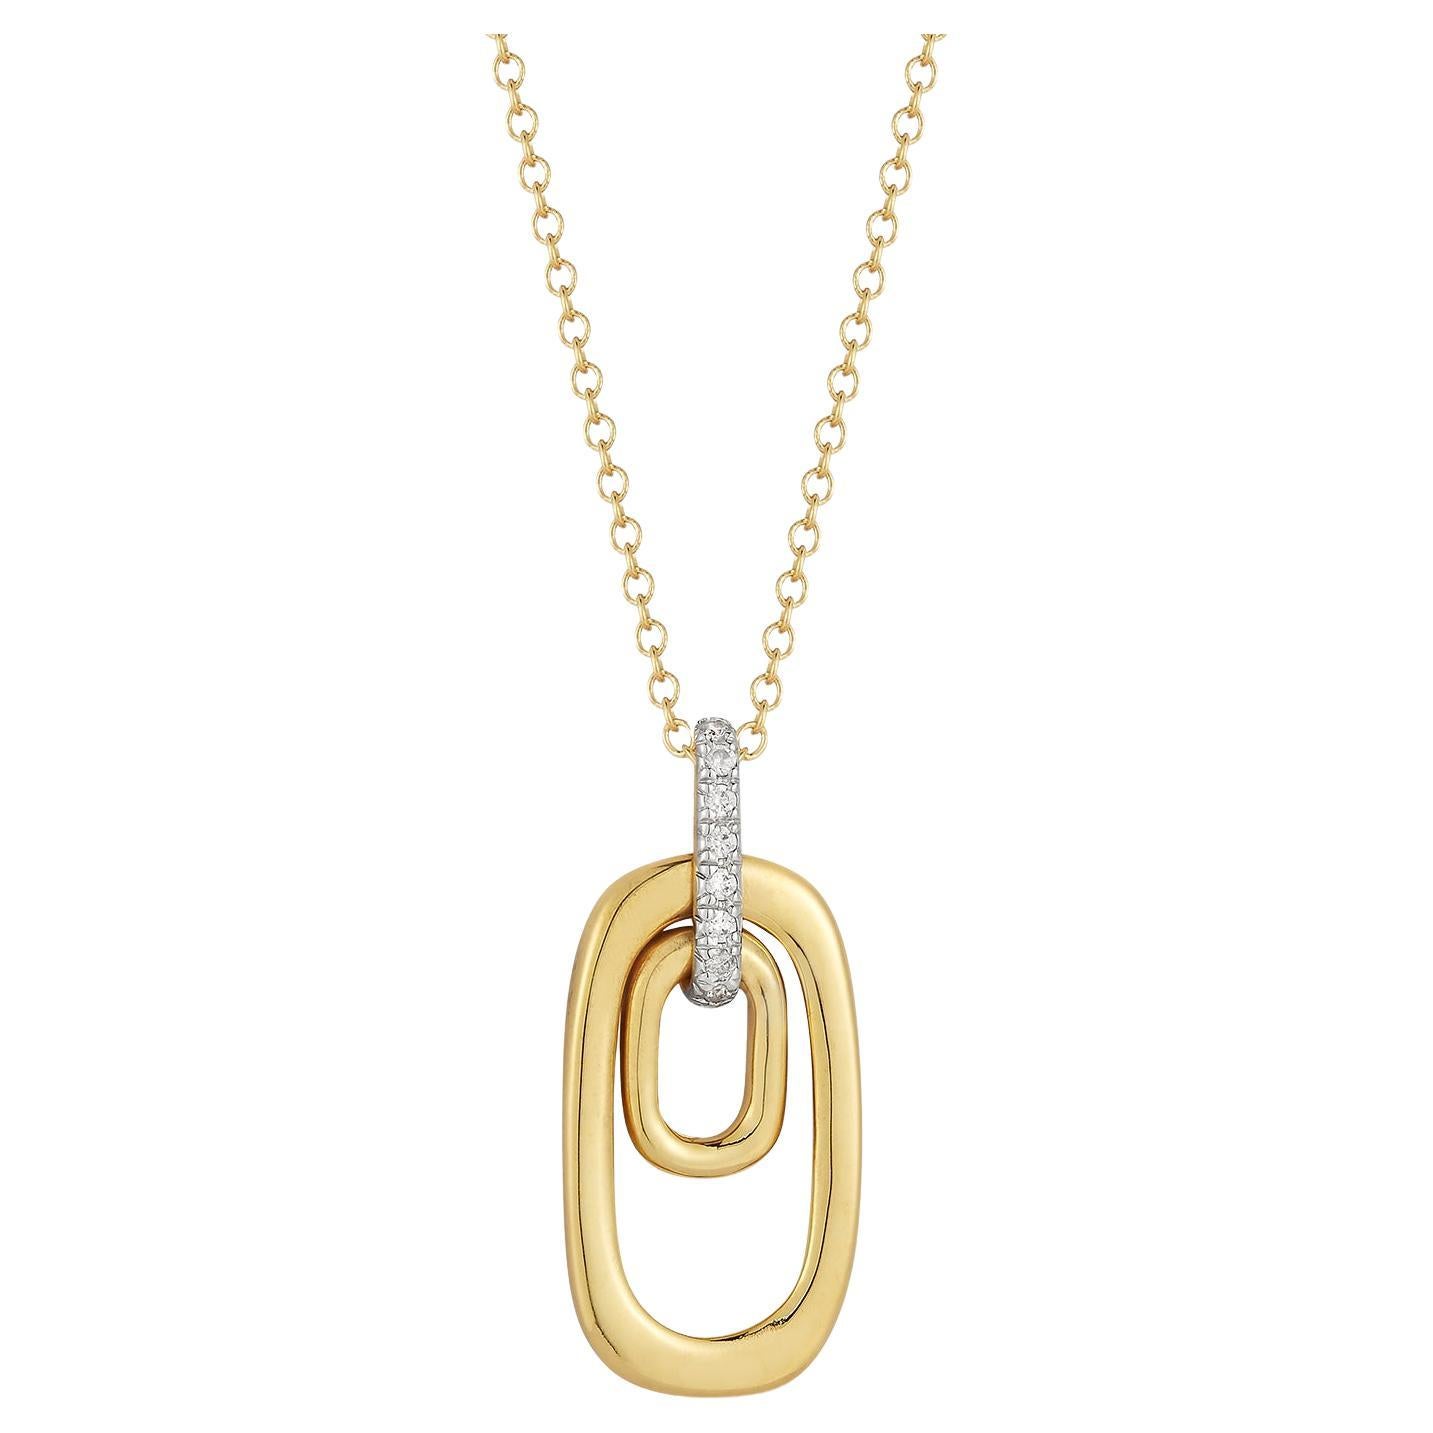 Hand-Crafted 14K Yellow Gold Ellipse Pendant For Sale